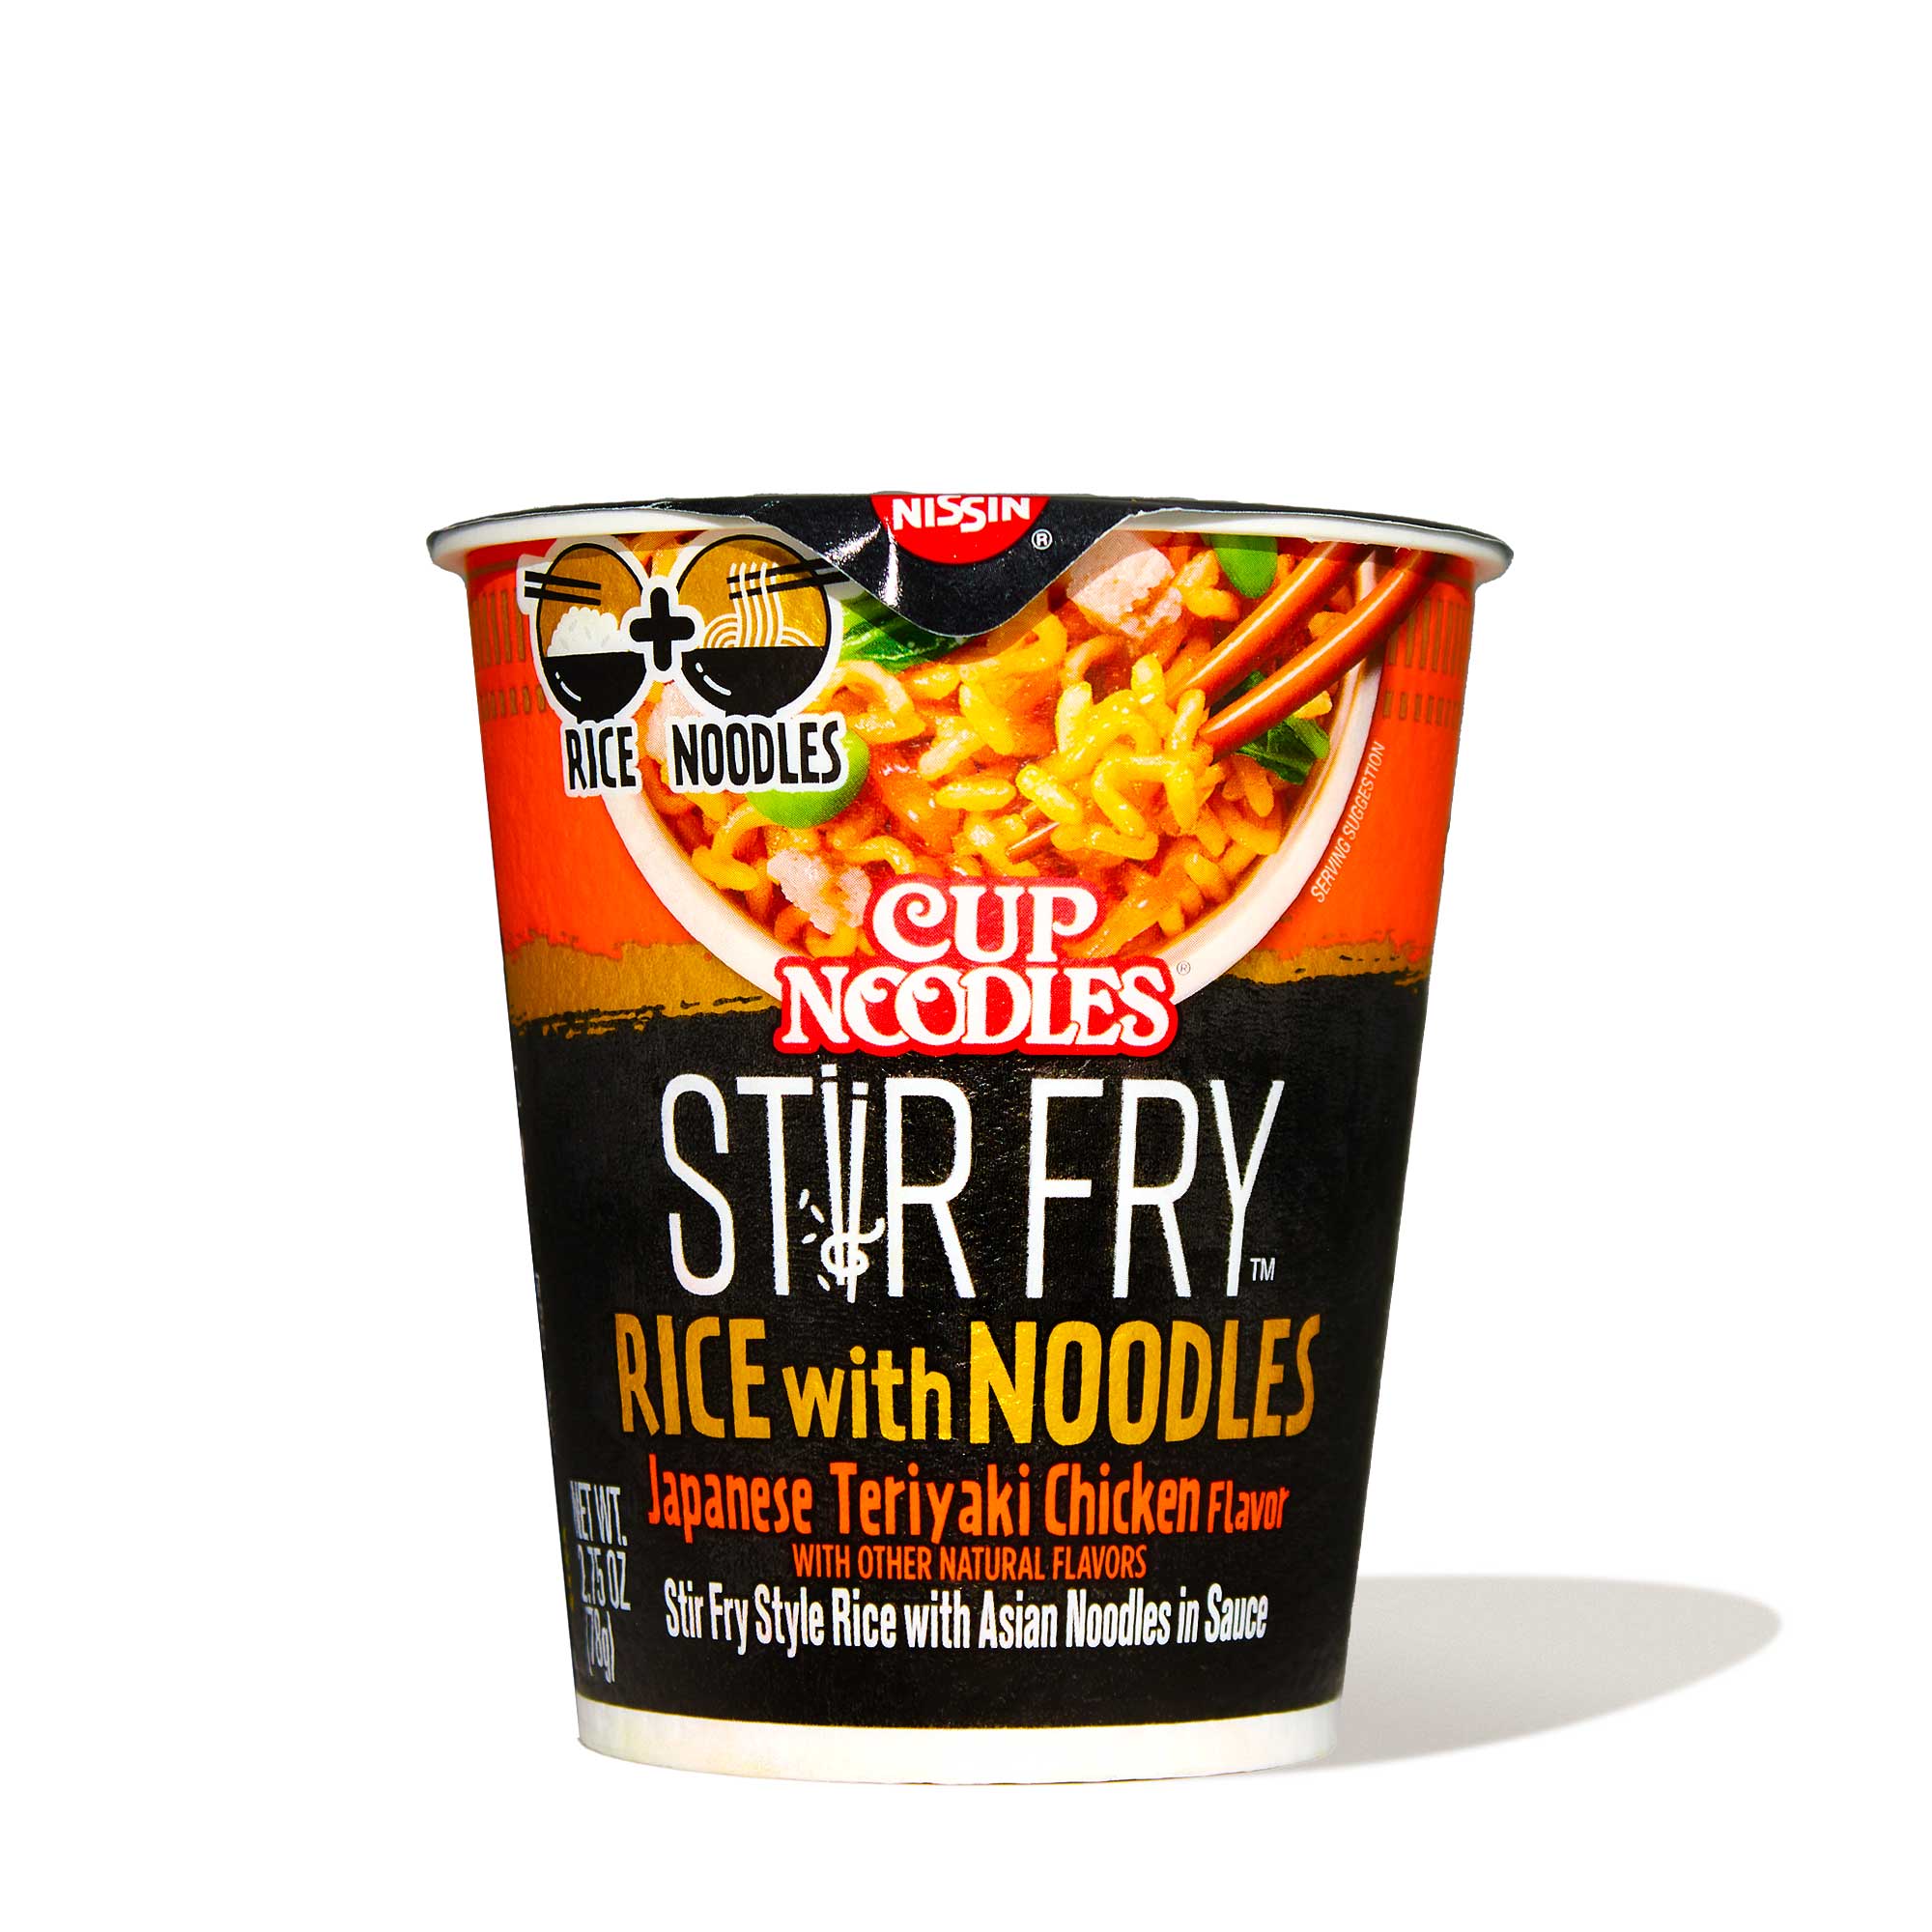 Nissin Cup Noodles Stir Fry Rice with Noodles Japanese Teriyaki Chicken